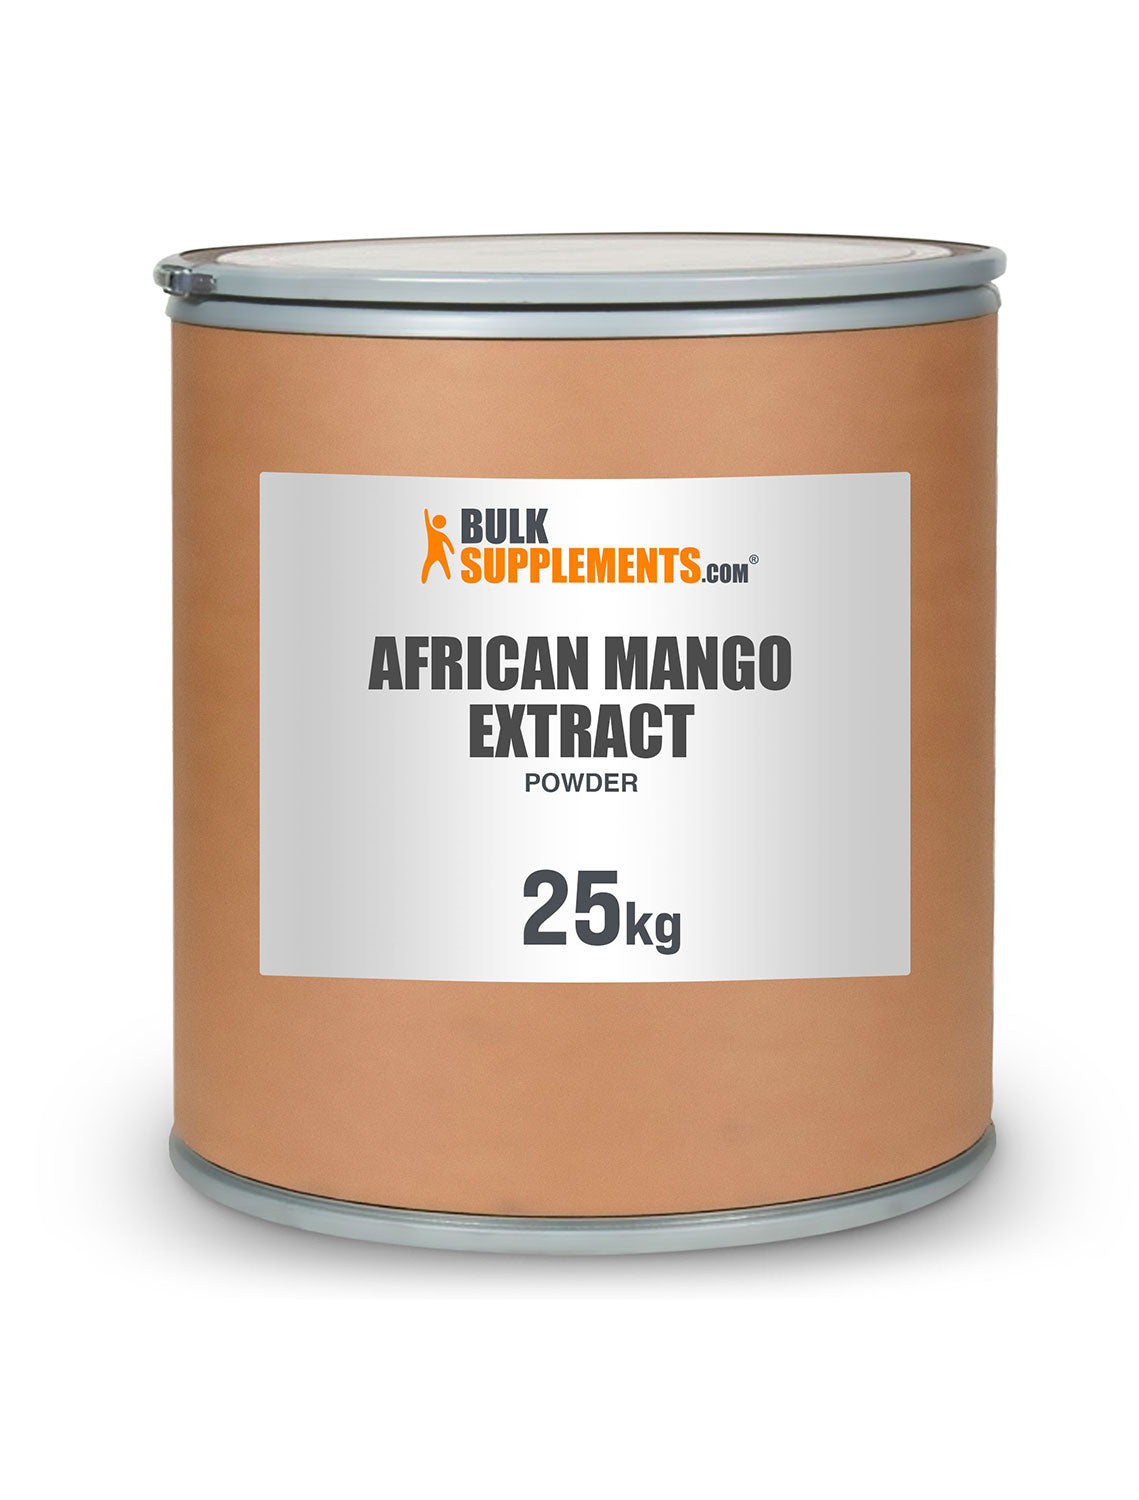 African Mango Extract Powder, 25kg can